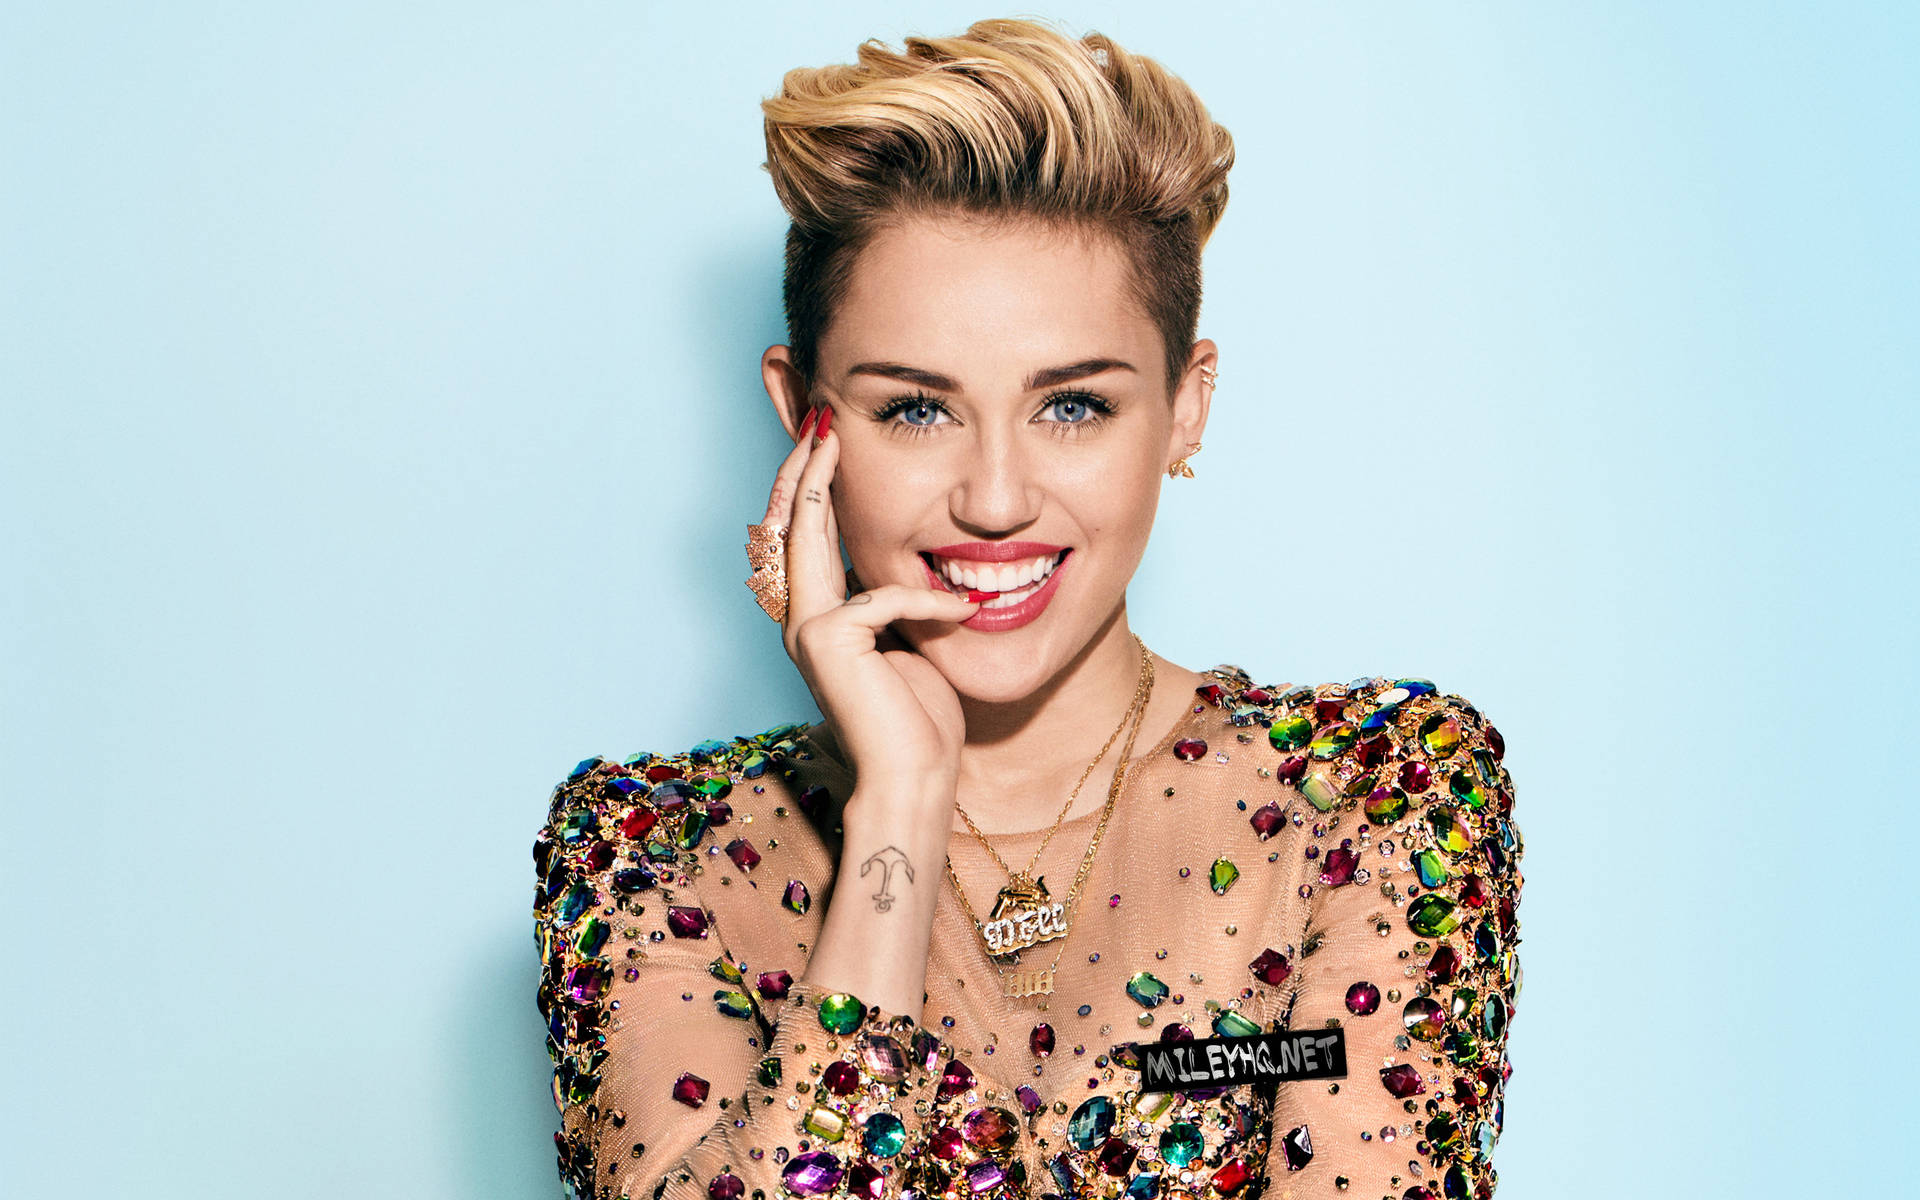 Miley Cyrus In Gem Stone Outfit